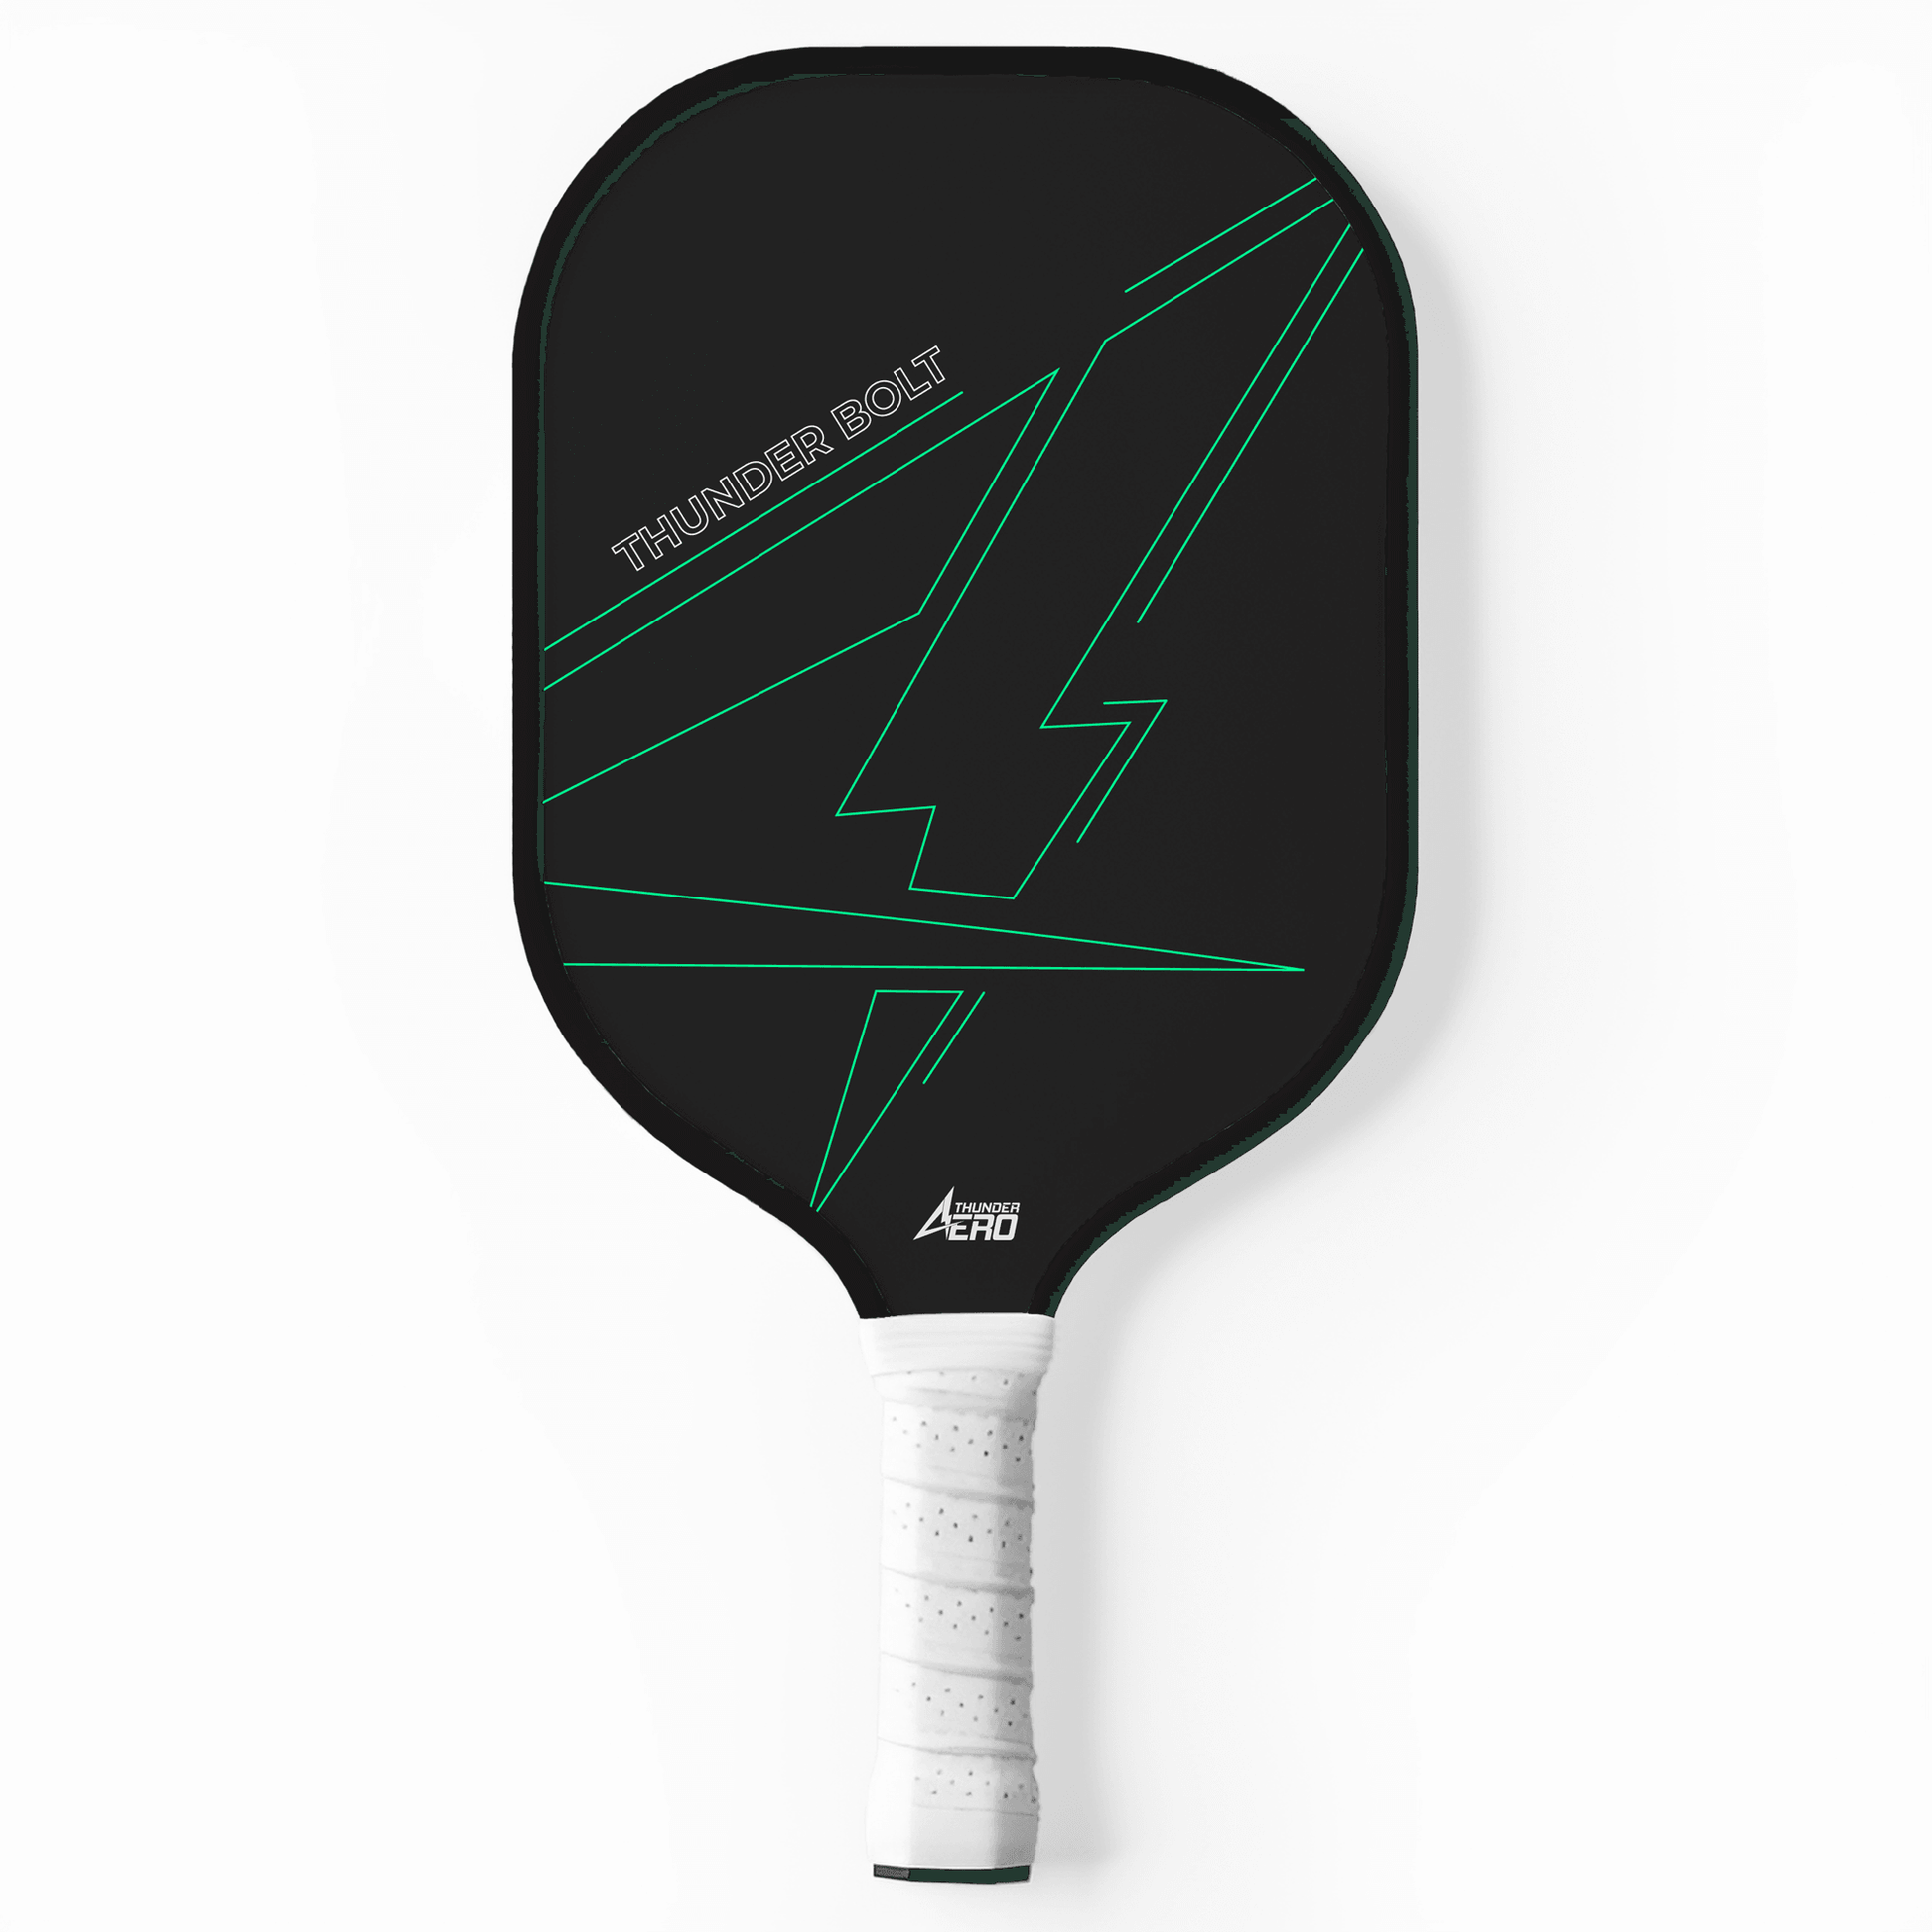 Epic drive Edition Best Professional Pickleball Paddle Brand AT-2000 Neon Green - Aero Thunder